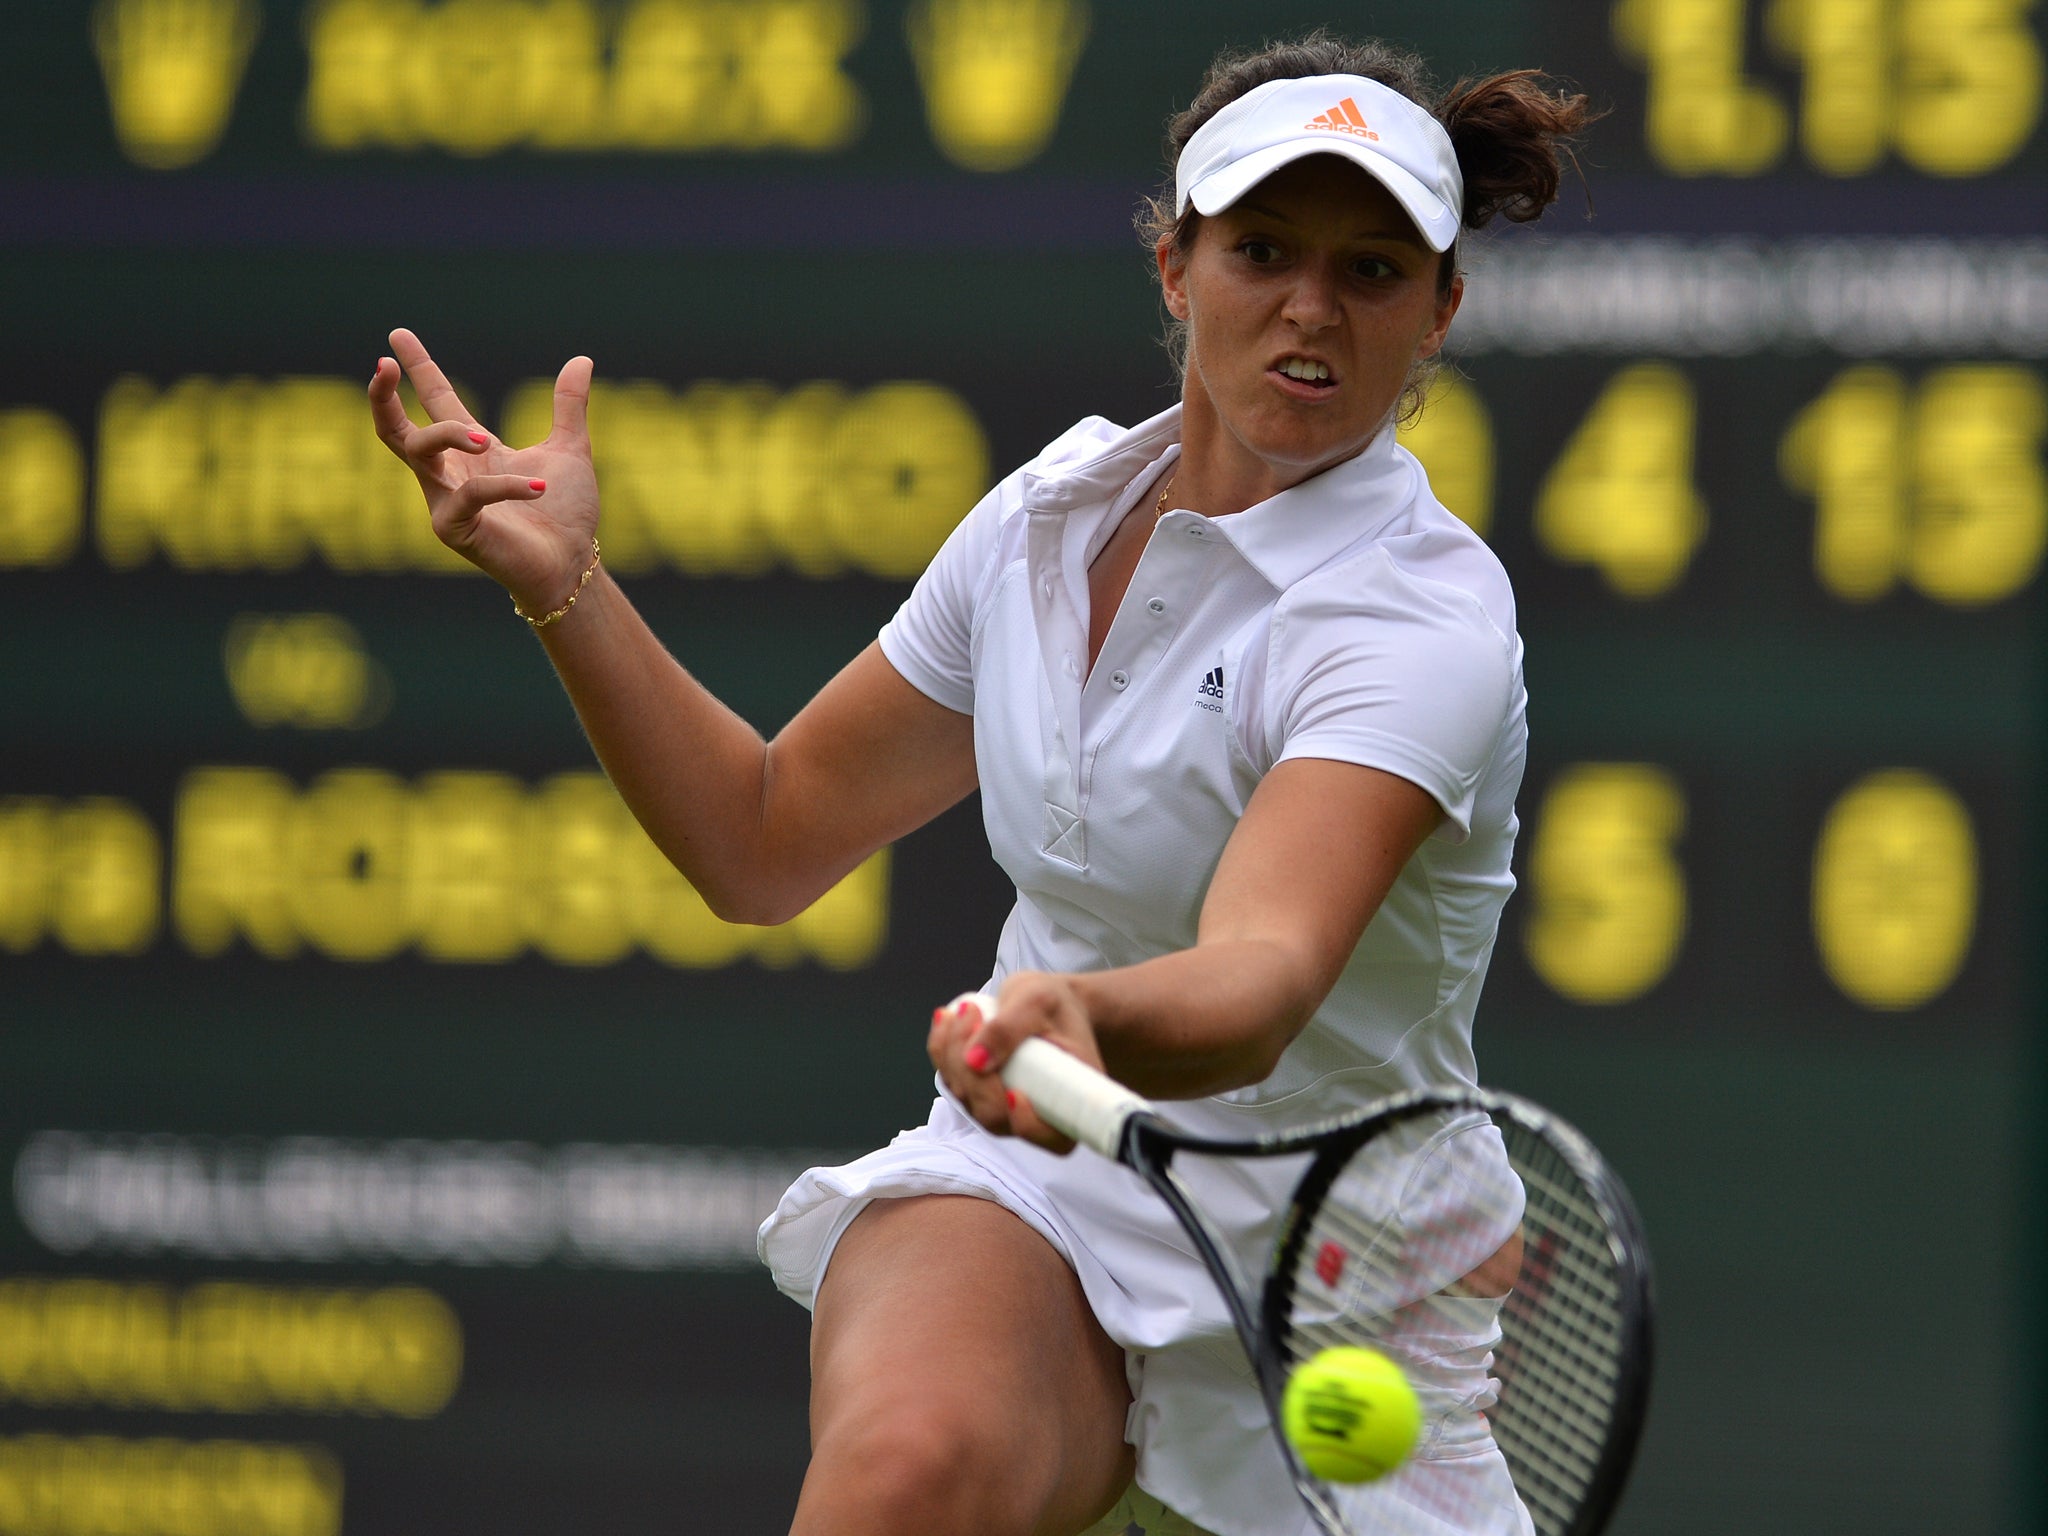 Laura Robson is in action against Mariano Duque-Marino